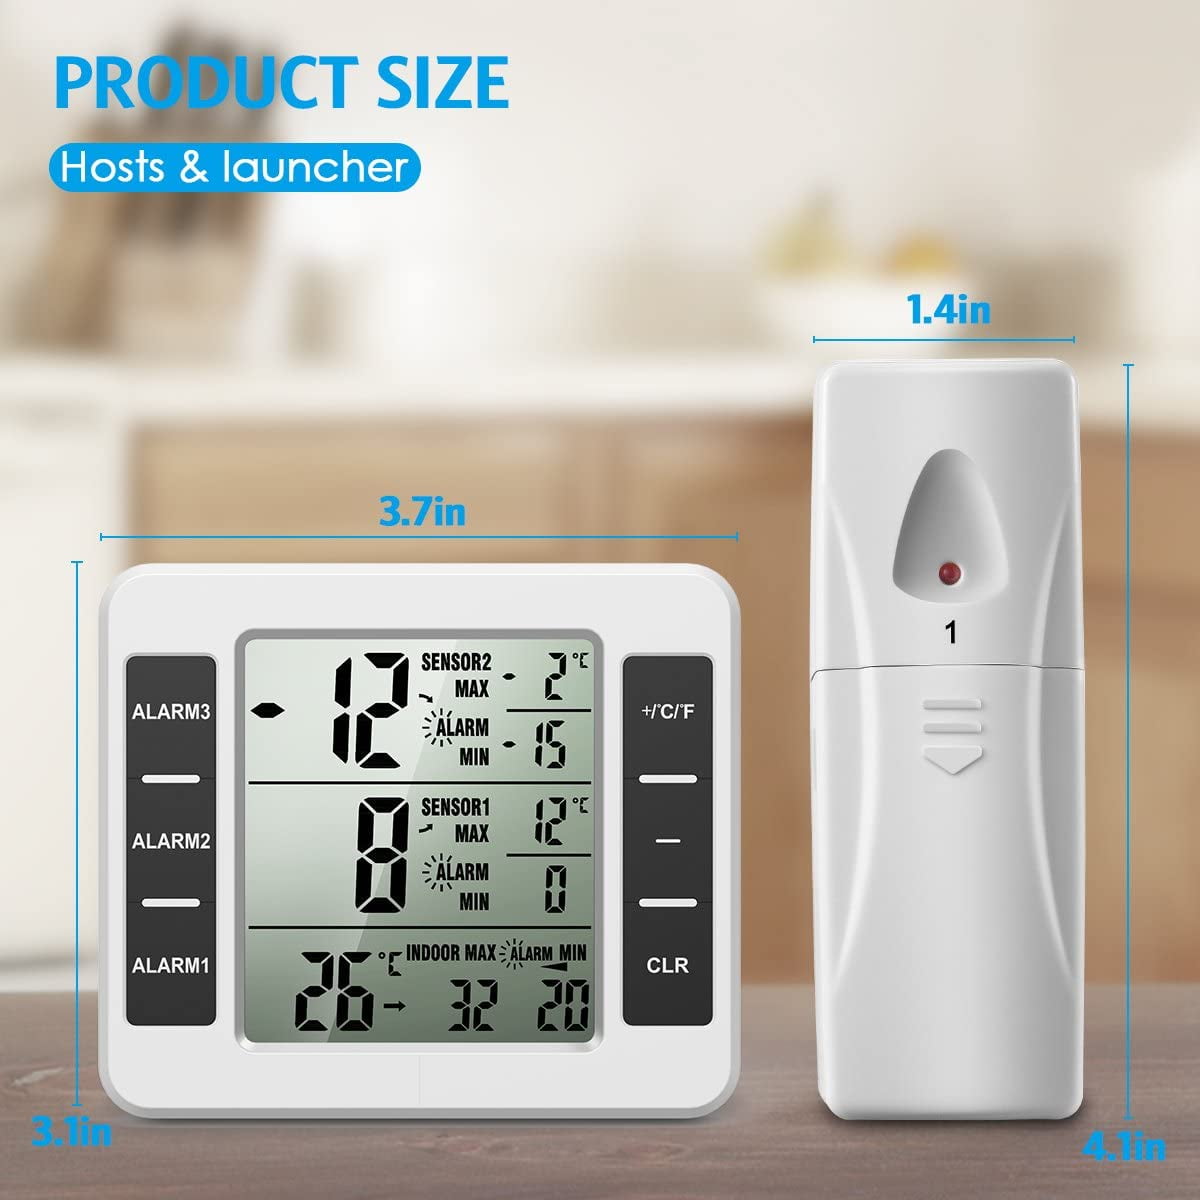 Dropship 1PC White Mini Electronic Temperature And Humidity Meter Car  Thermometer With Smiling Face Display Refrigerator Thermometer to Sell  Online at a Lower Price